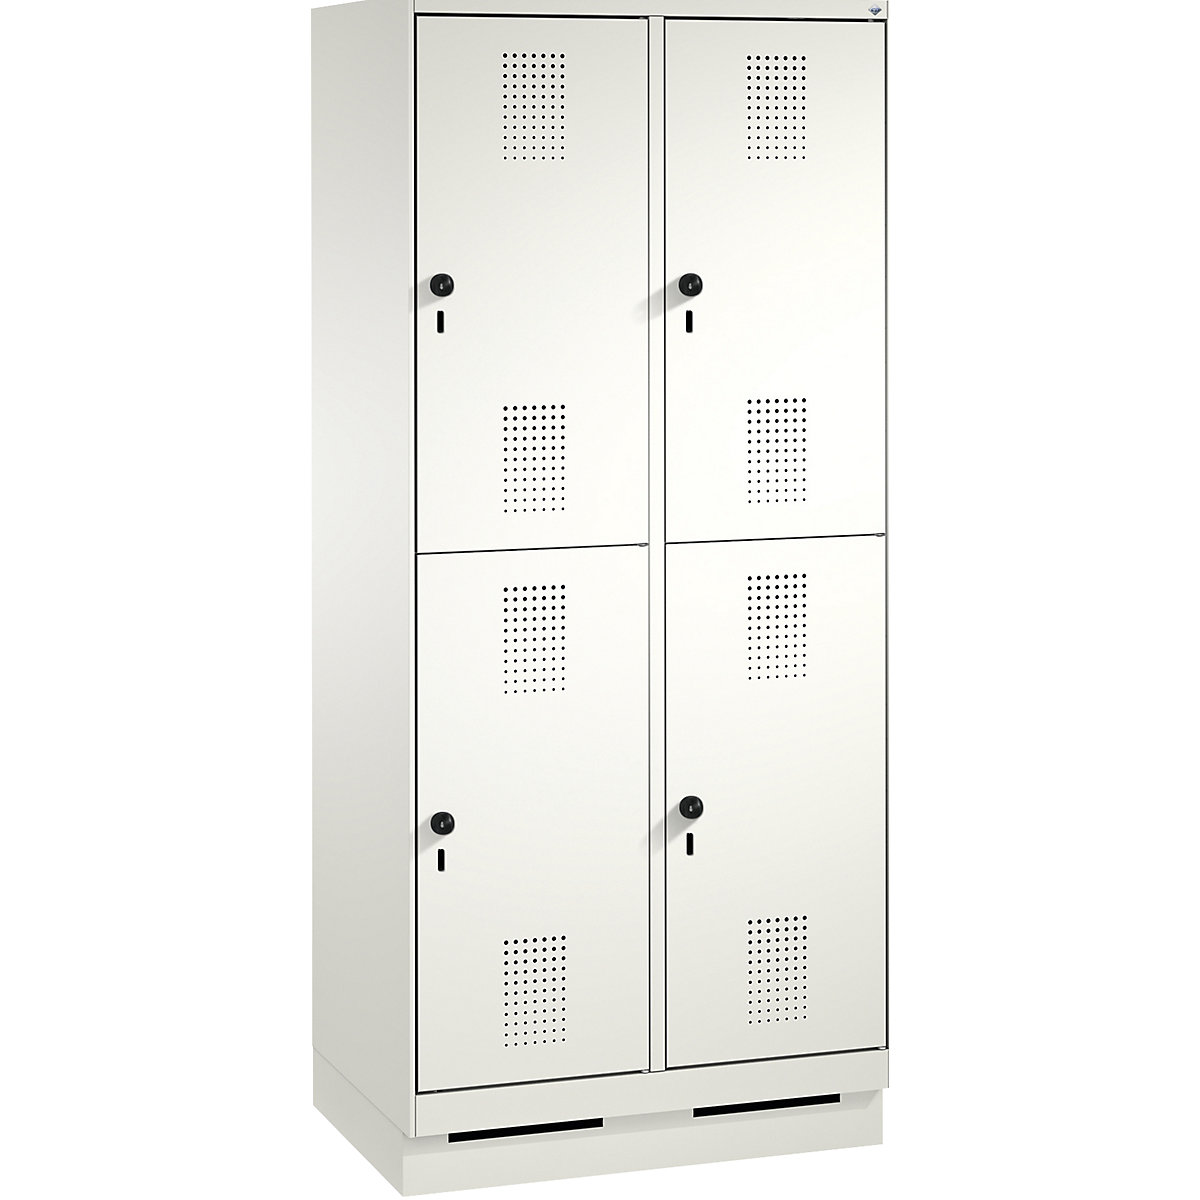 EVOLO cloakroom locker, double tier, with plinth – C+P, 2 compartments, 2 shelf compartments each, compartment width 400 mm, traffic white / traffic white-16